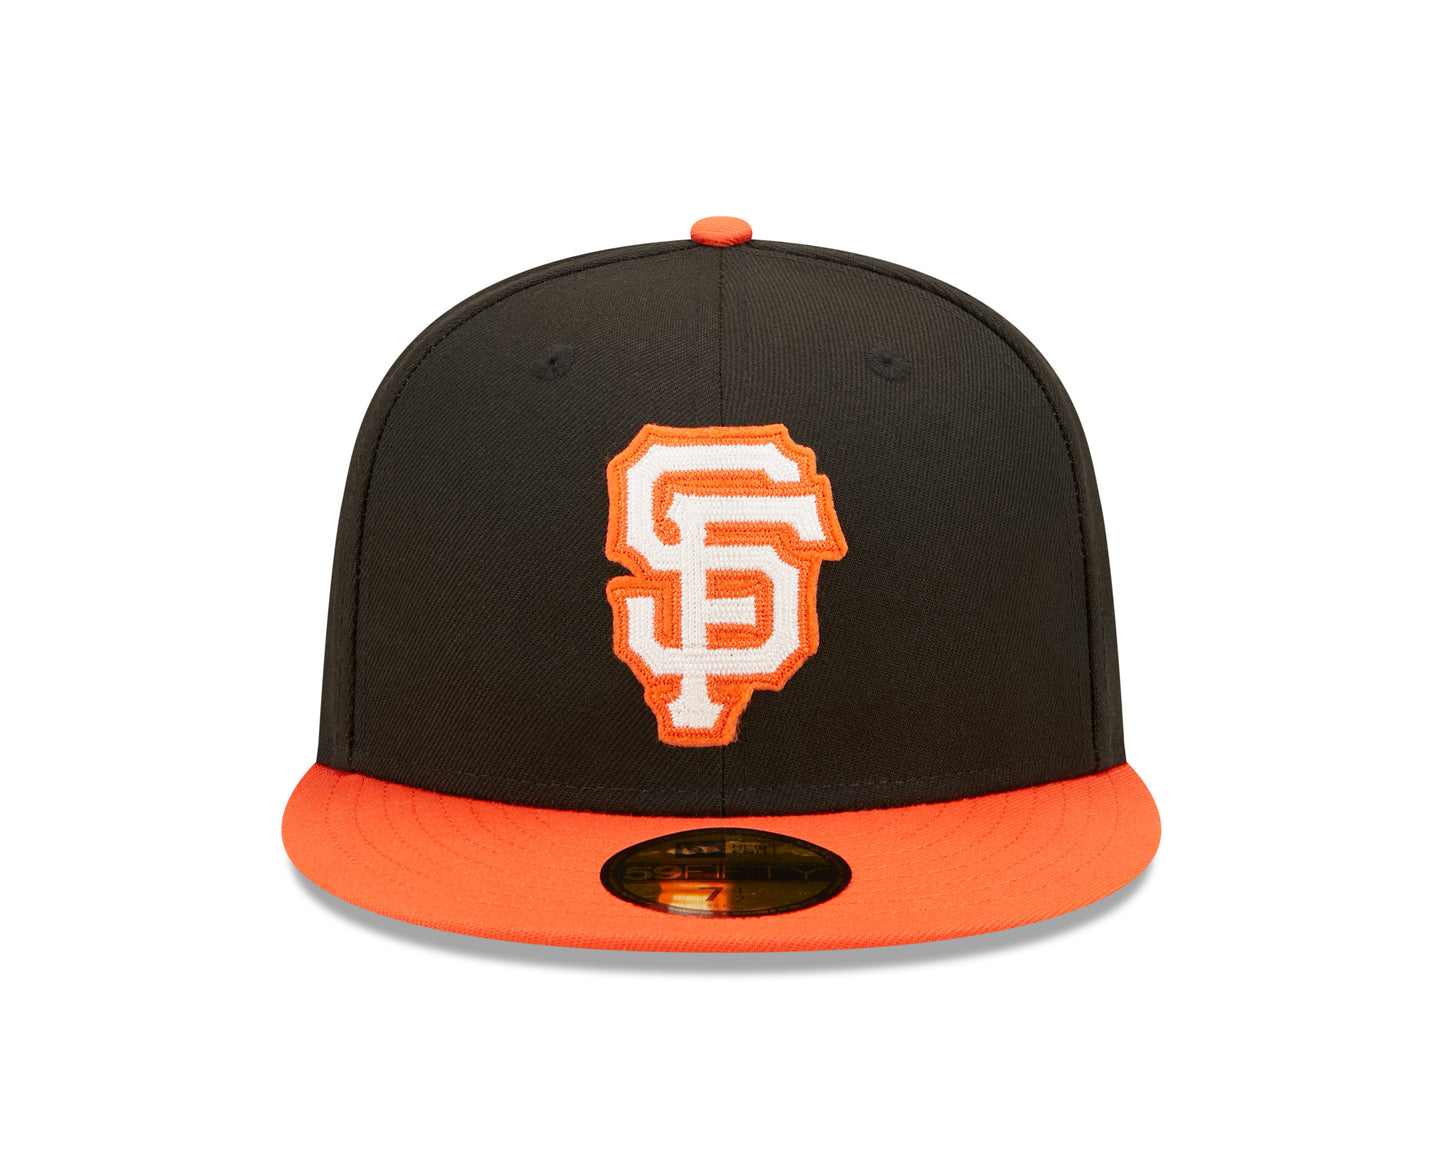 San Francisco Giants New Era World Series Letterman 59FIFTY Fitted Hat